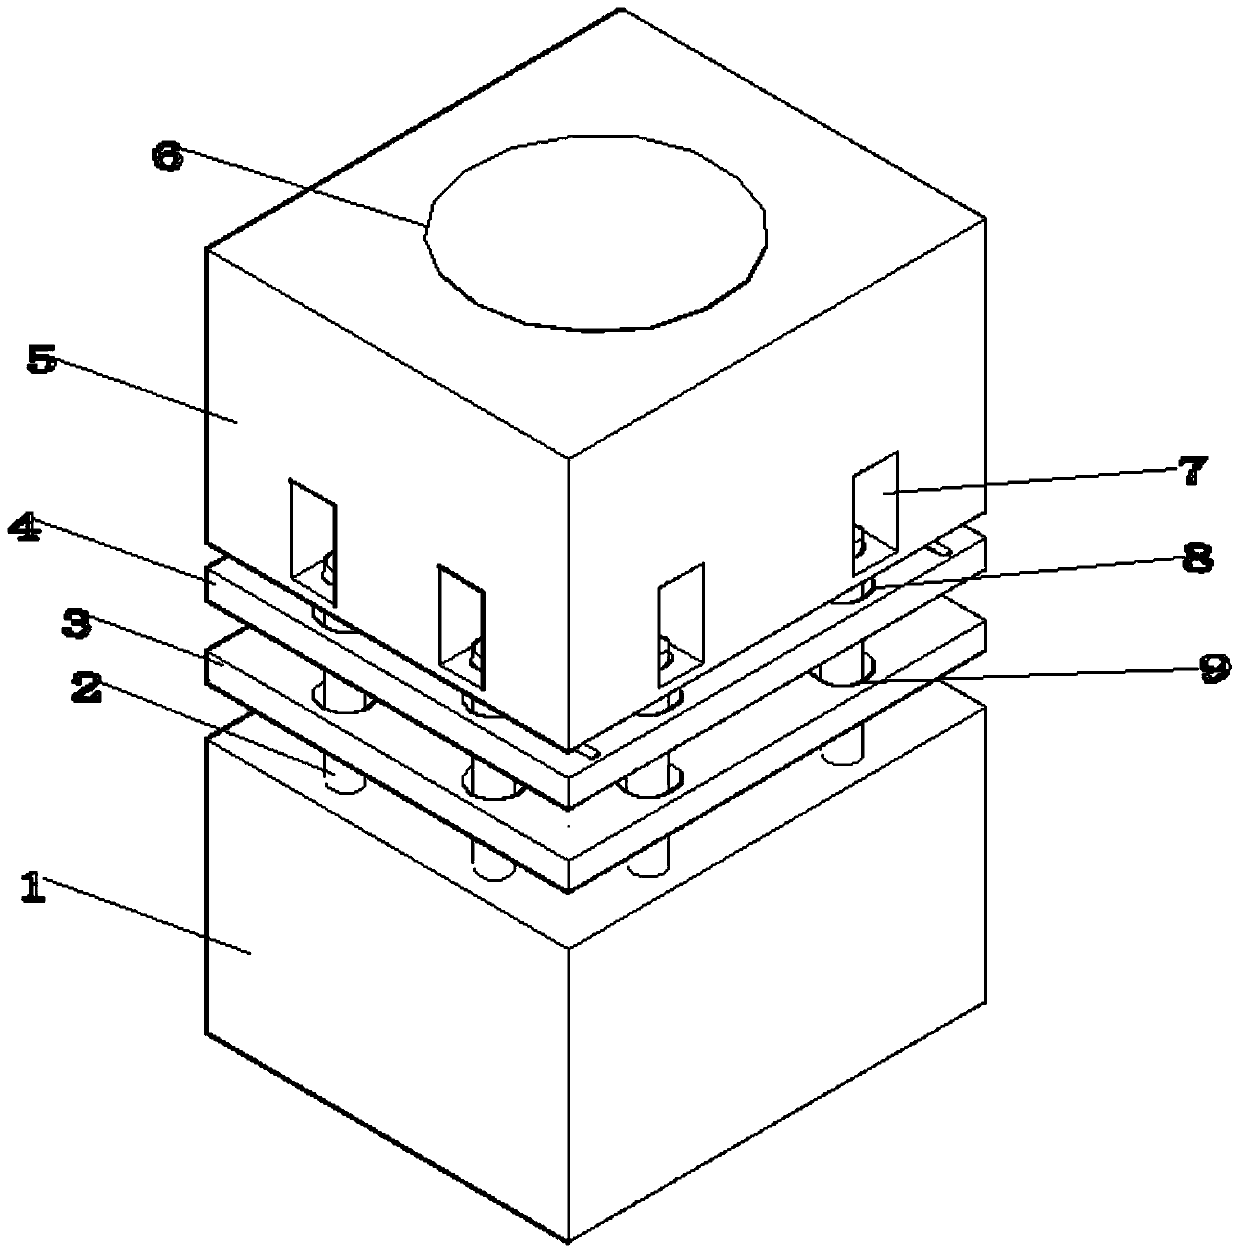 Novel square pile mechanical connecting piece